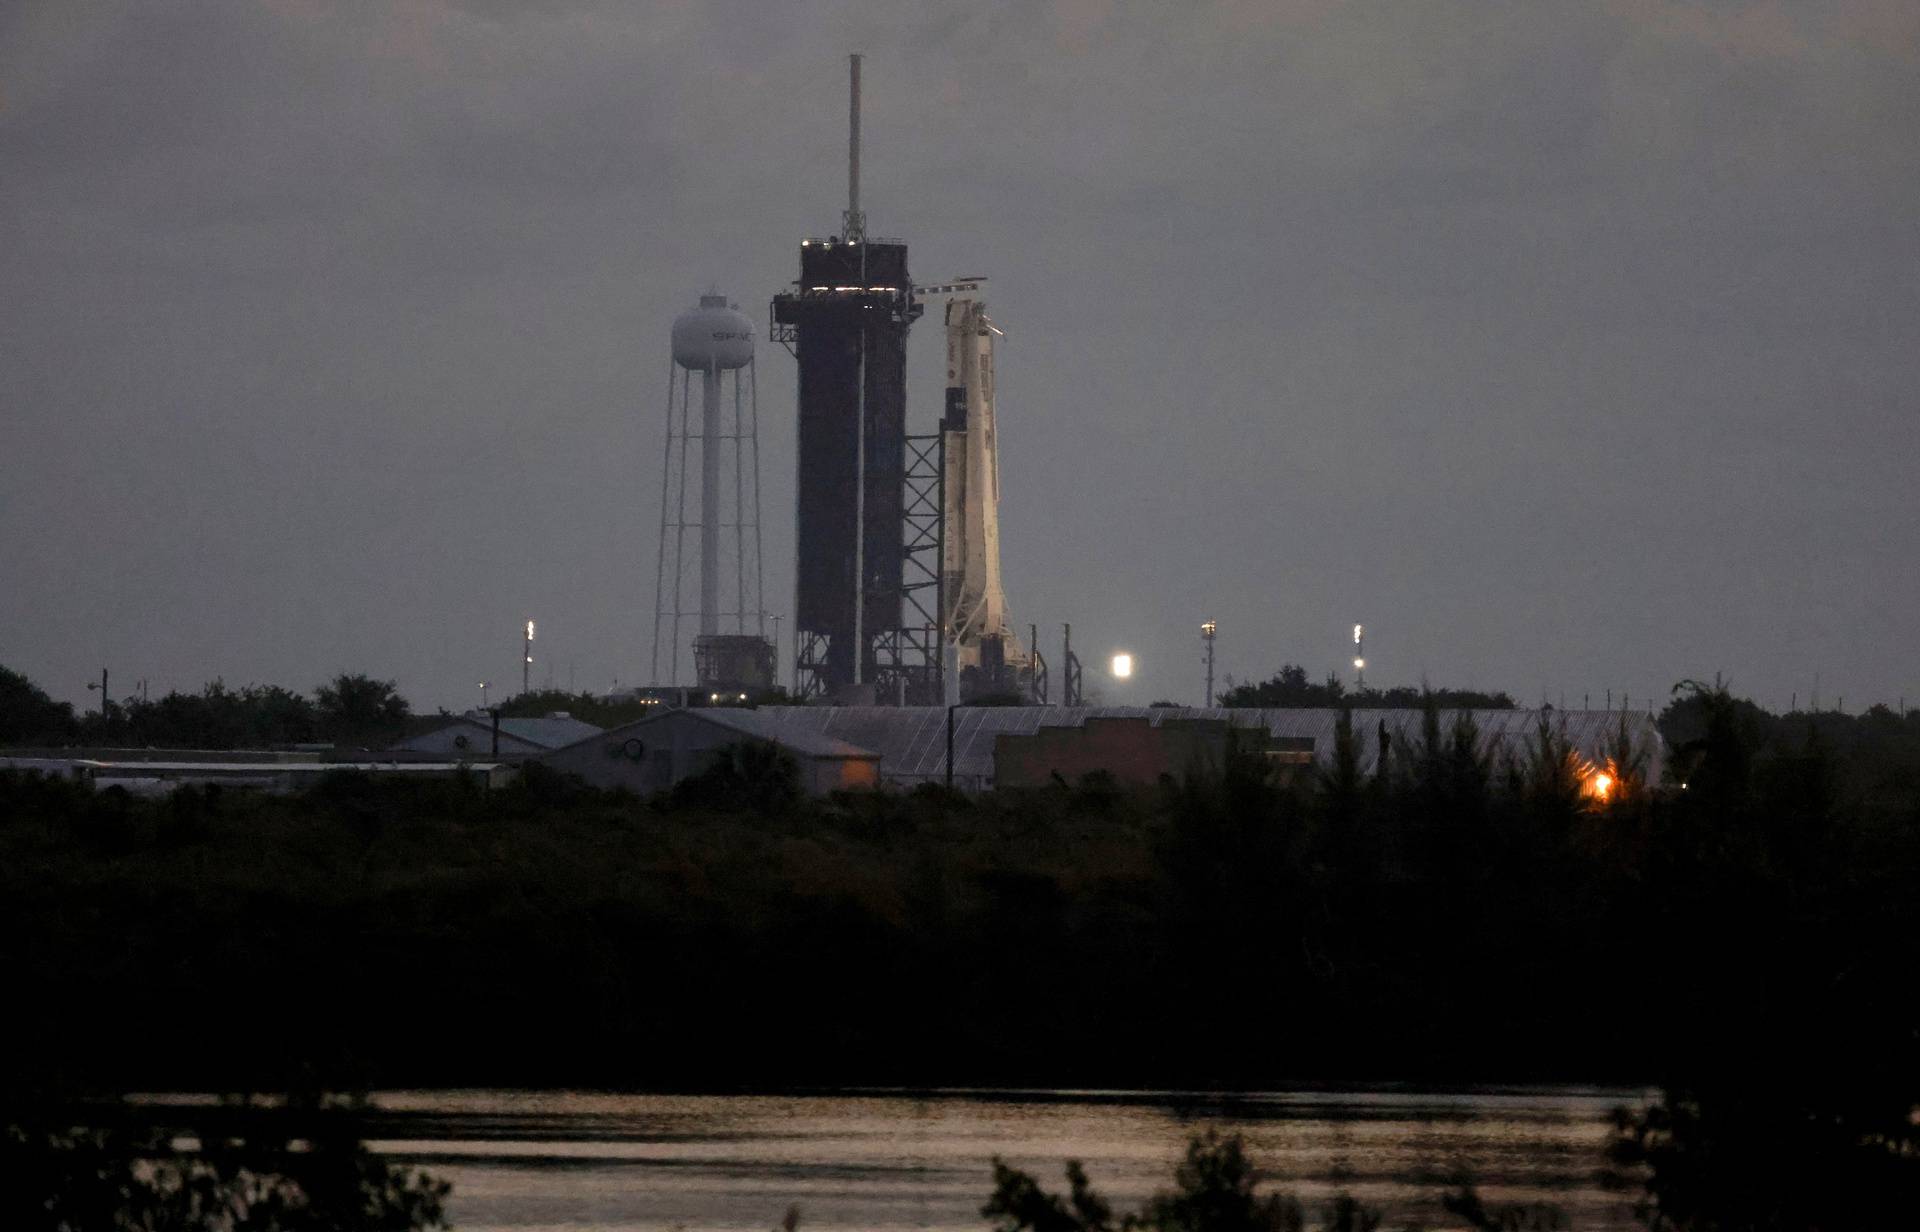 A SpaceX Falcon 9 rocket stands on the launch pad at the Kennedy Space Center in Cape Canaveral